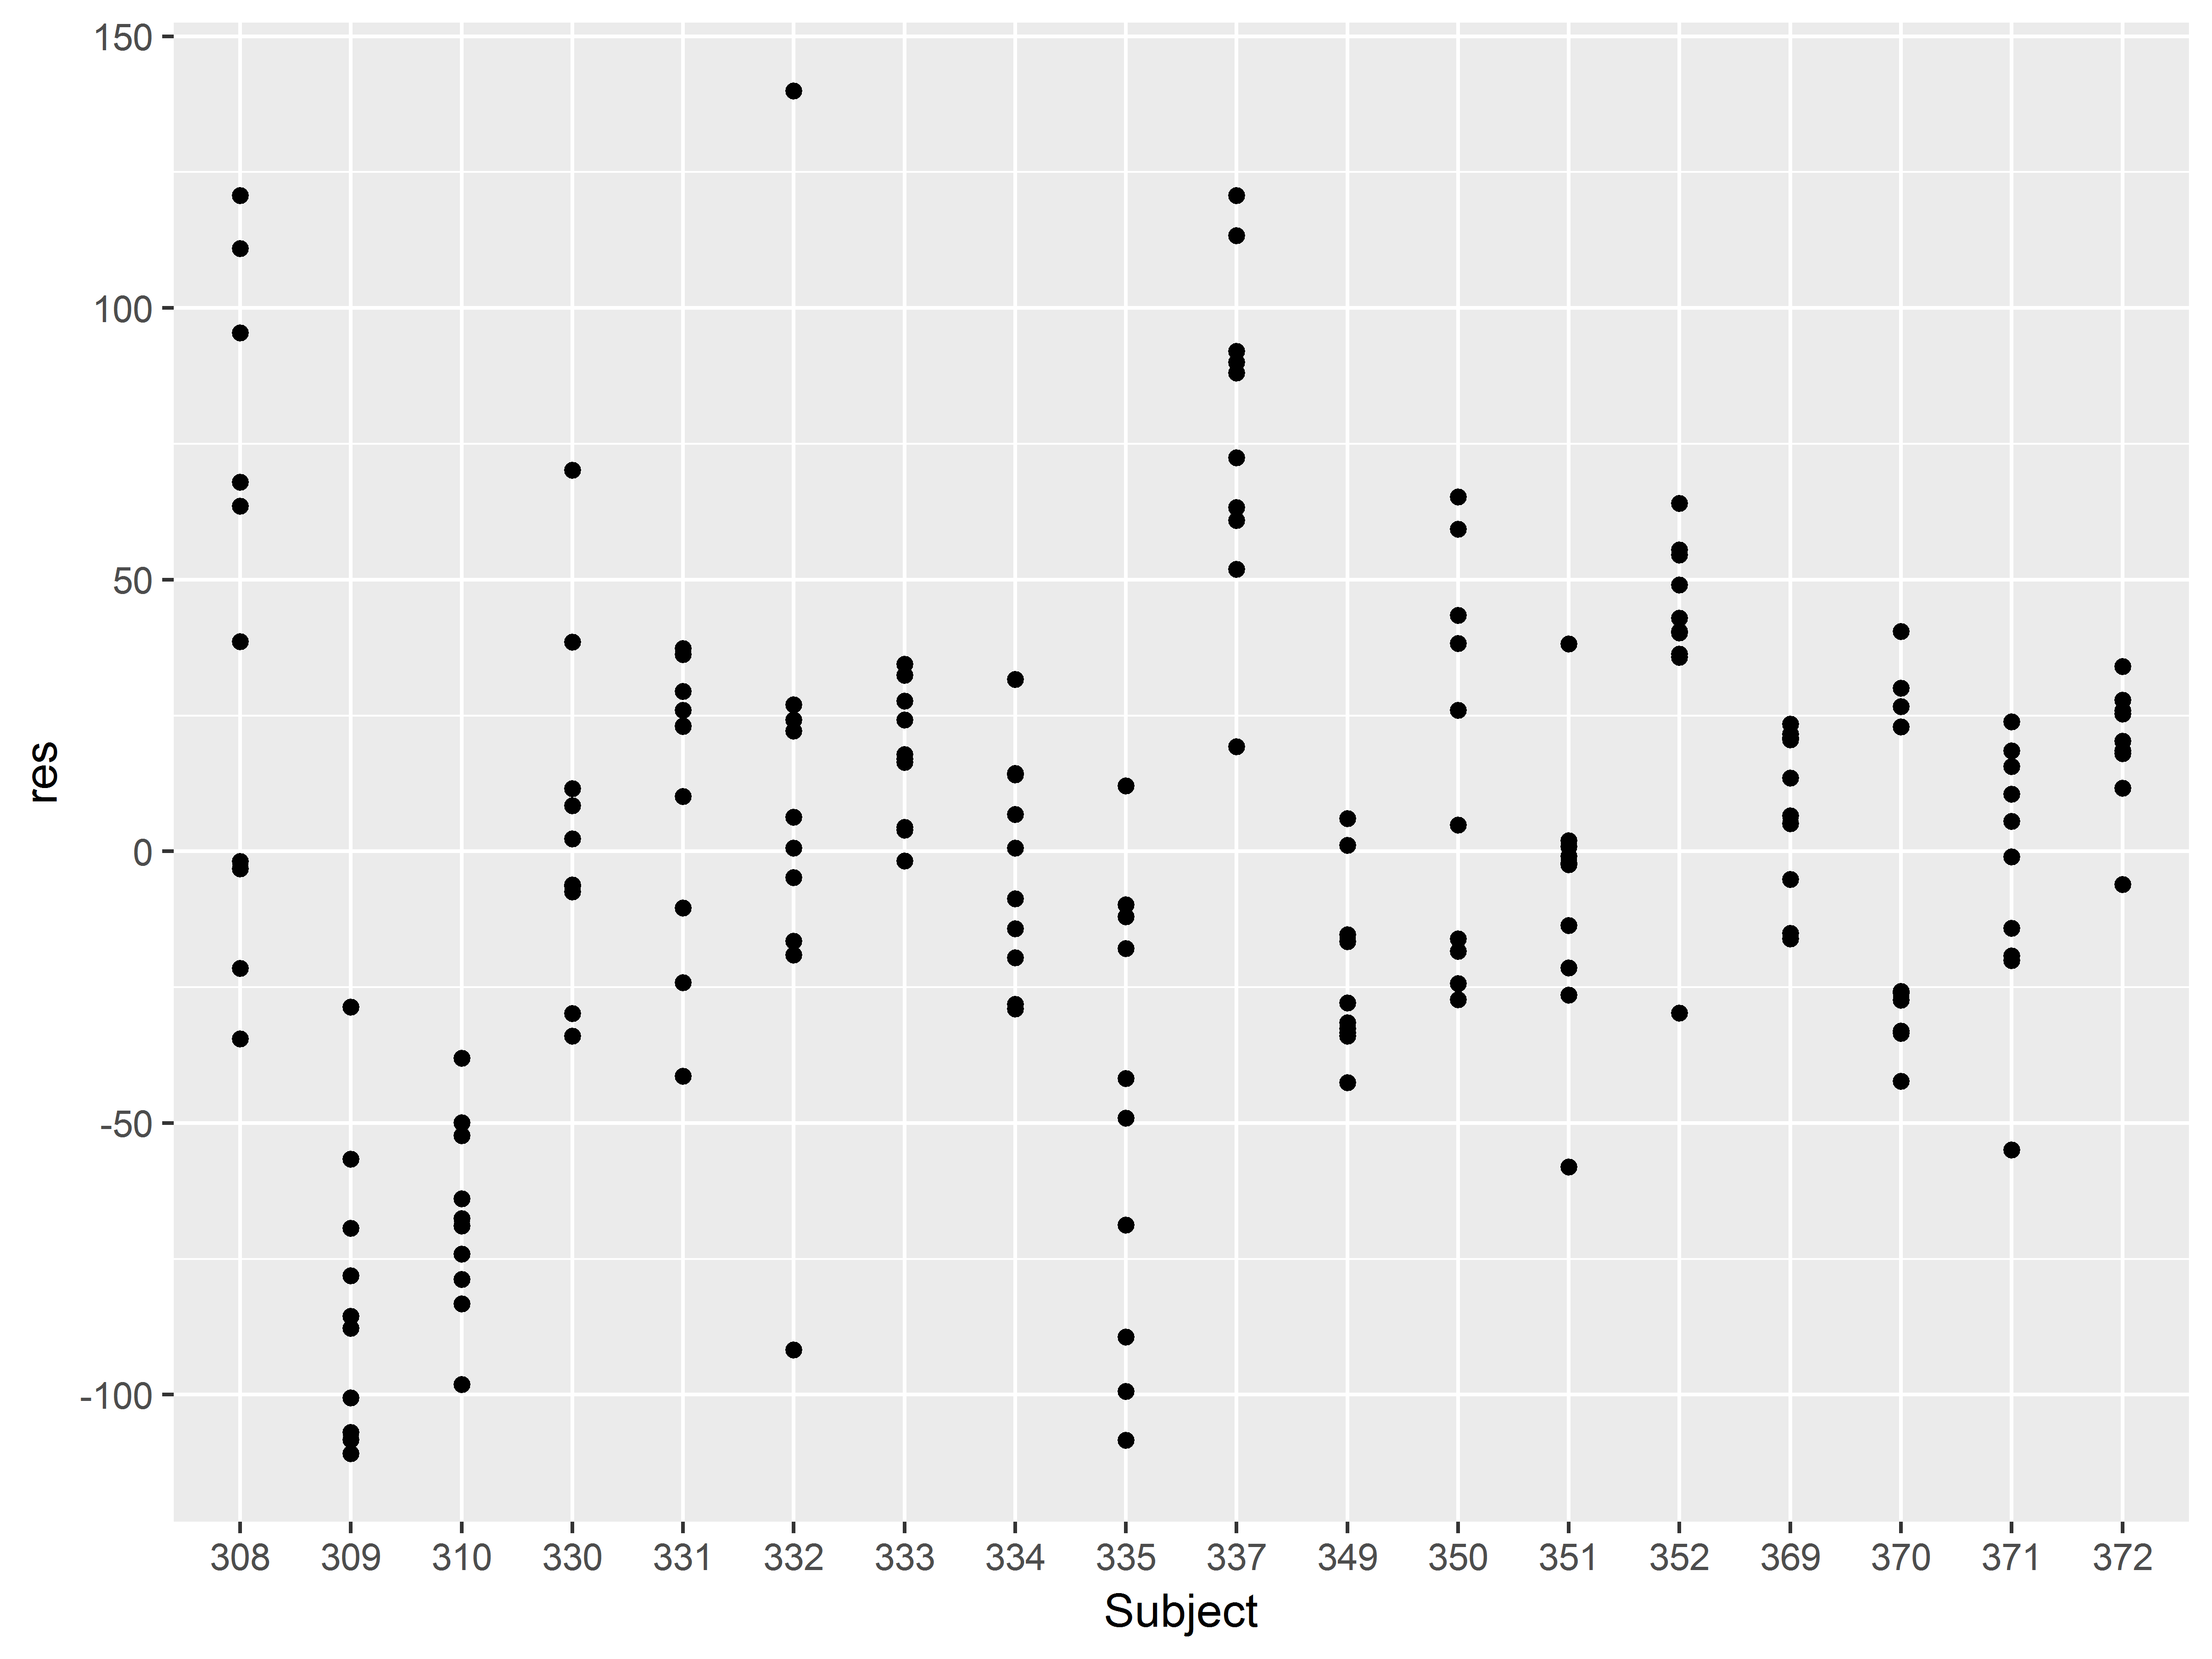 Fig 4.4a residuals by Subject